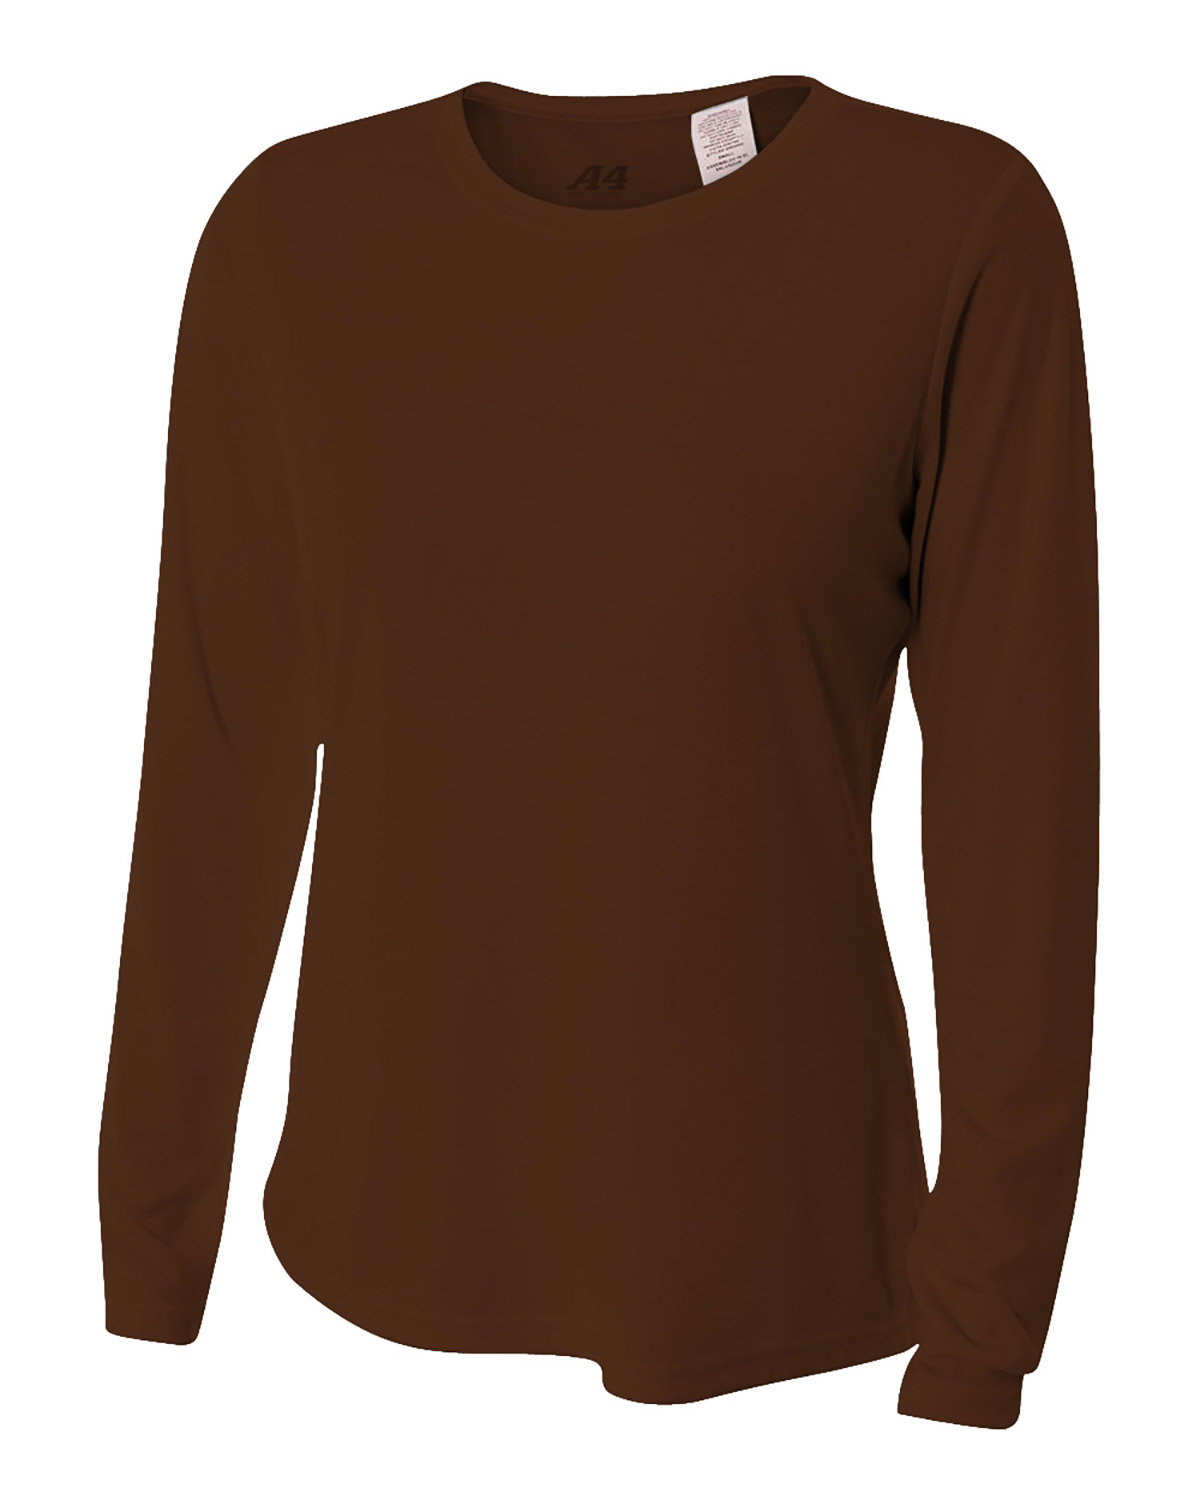 A4 Ladies' Long Sleeve Cooling Performance Crew Shirt BROWN 